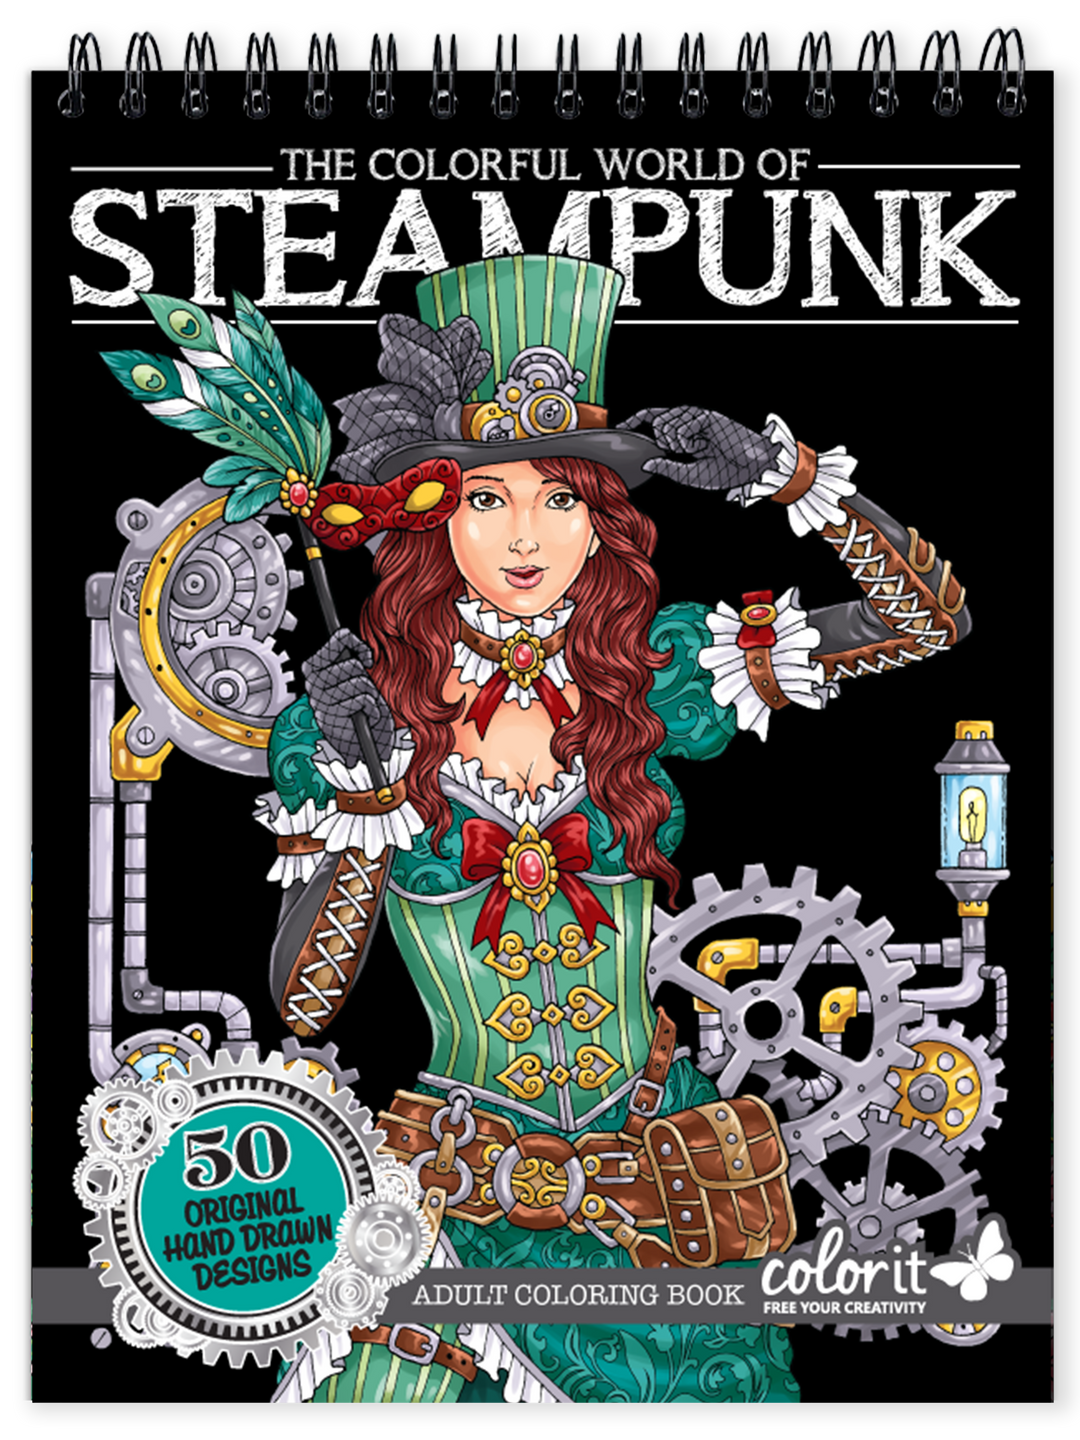 Colorful World of Steampunk Illustrated By Hasby Mubarok